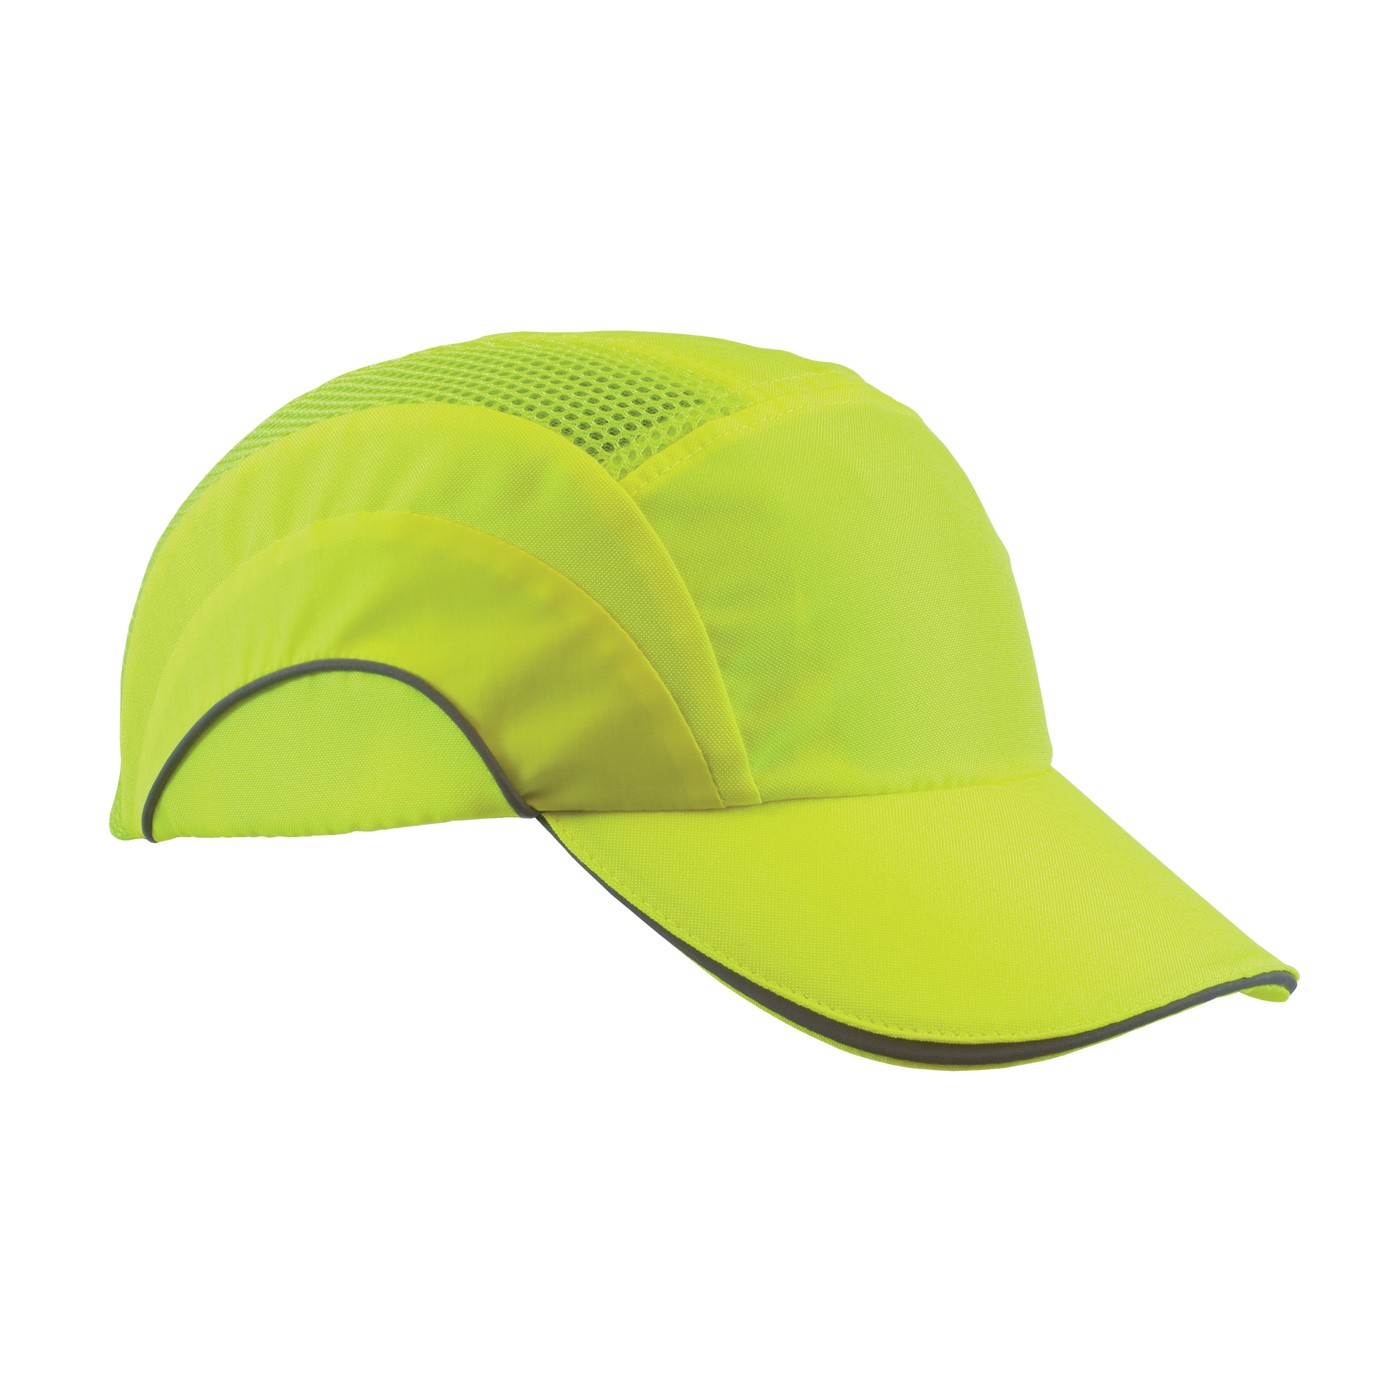 HardCap A1+™ Hi-Vis Baseball Style Bump Cap with HDPE Protective Liner and Adjustable Back  (#282-ABR170-LY)